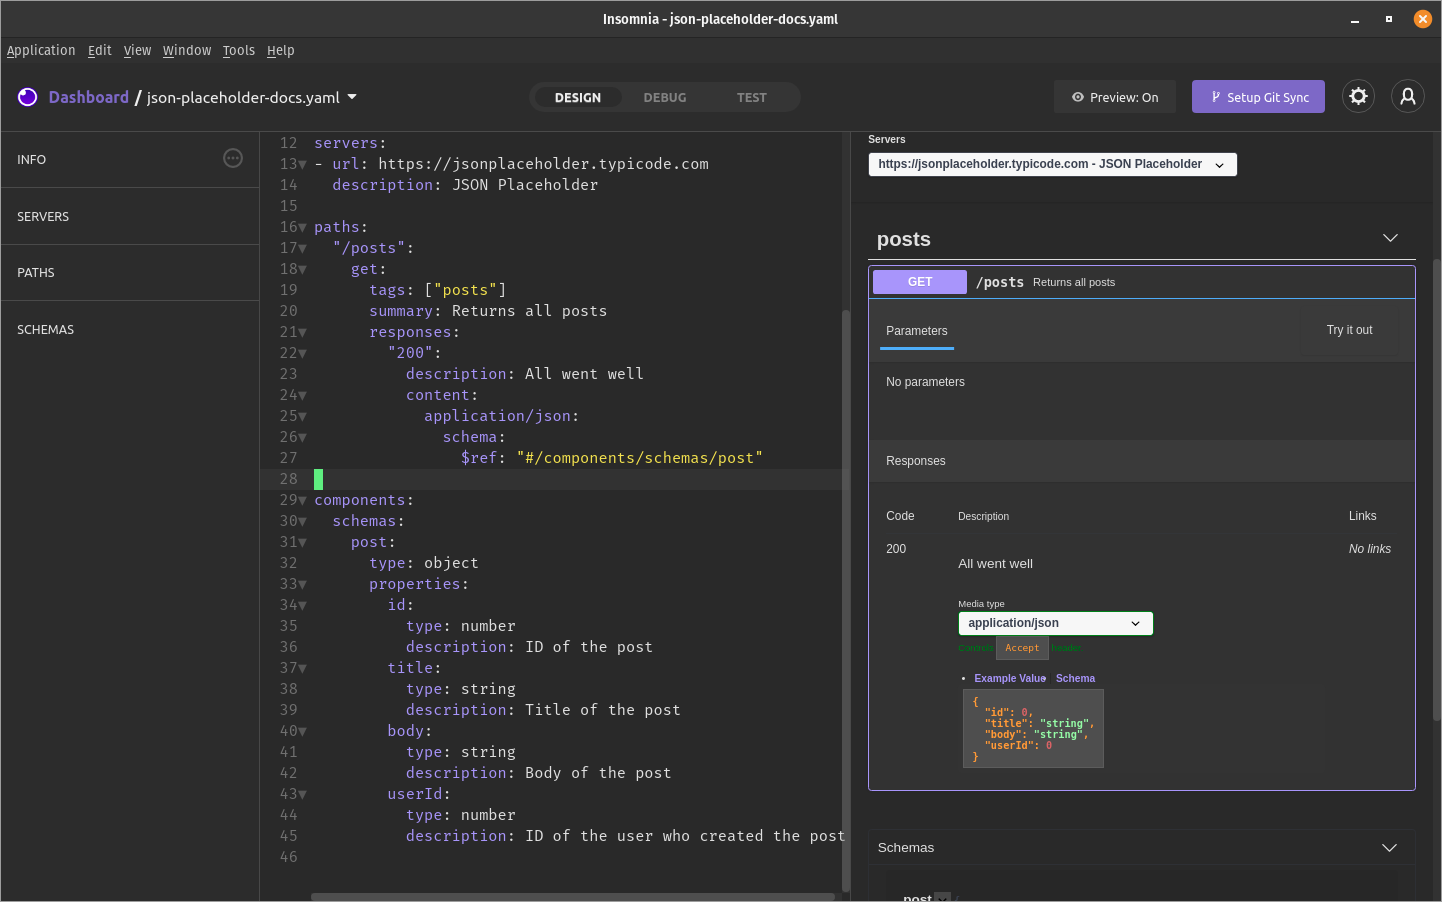 Screenshot of Insomnia showing YAML in the center pane and a preview in the right pane.